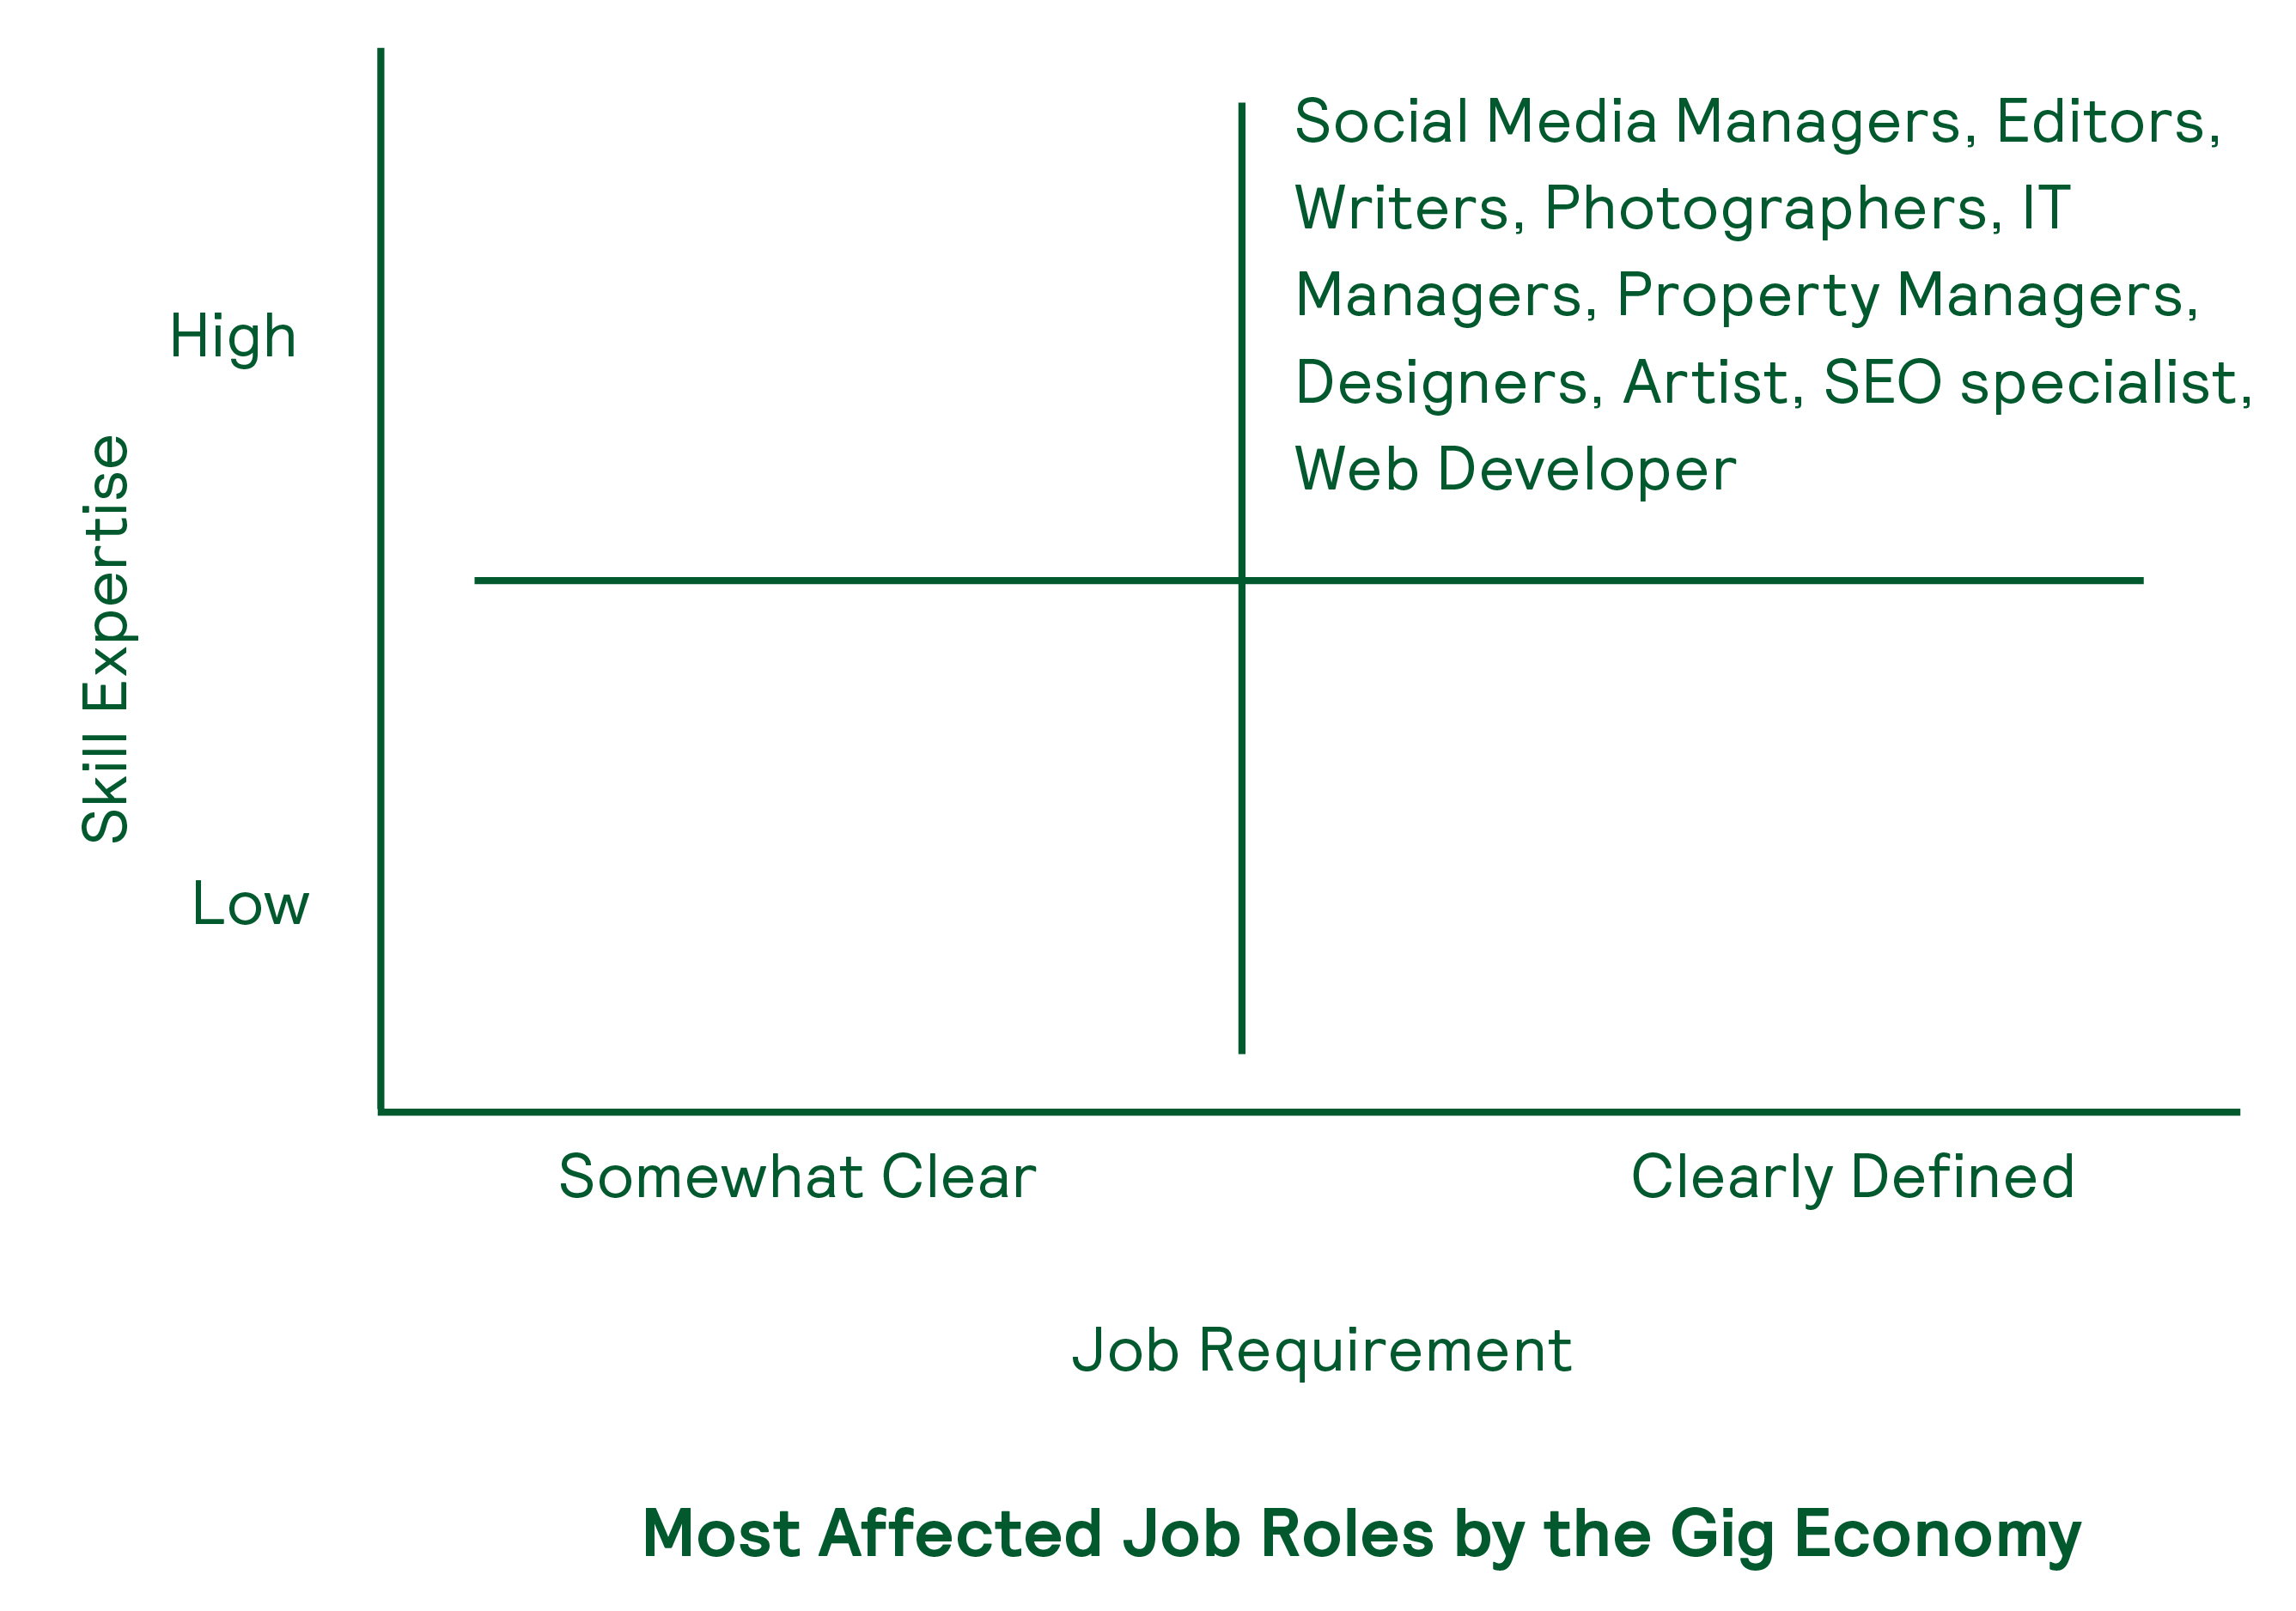 most_affected_job_roles_by_the_gig_economy_how_are_organizations_gearing_up_for_the_gig_economy